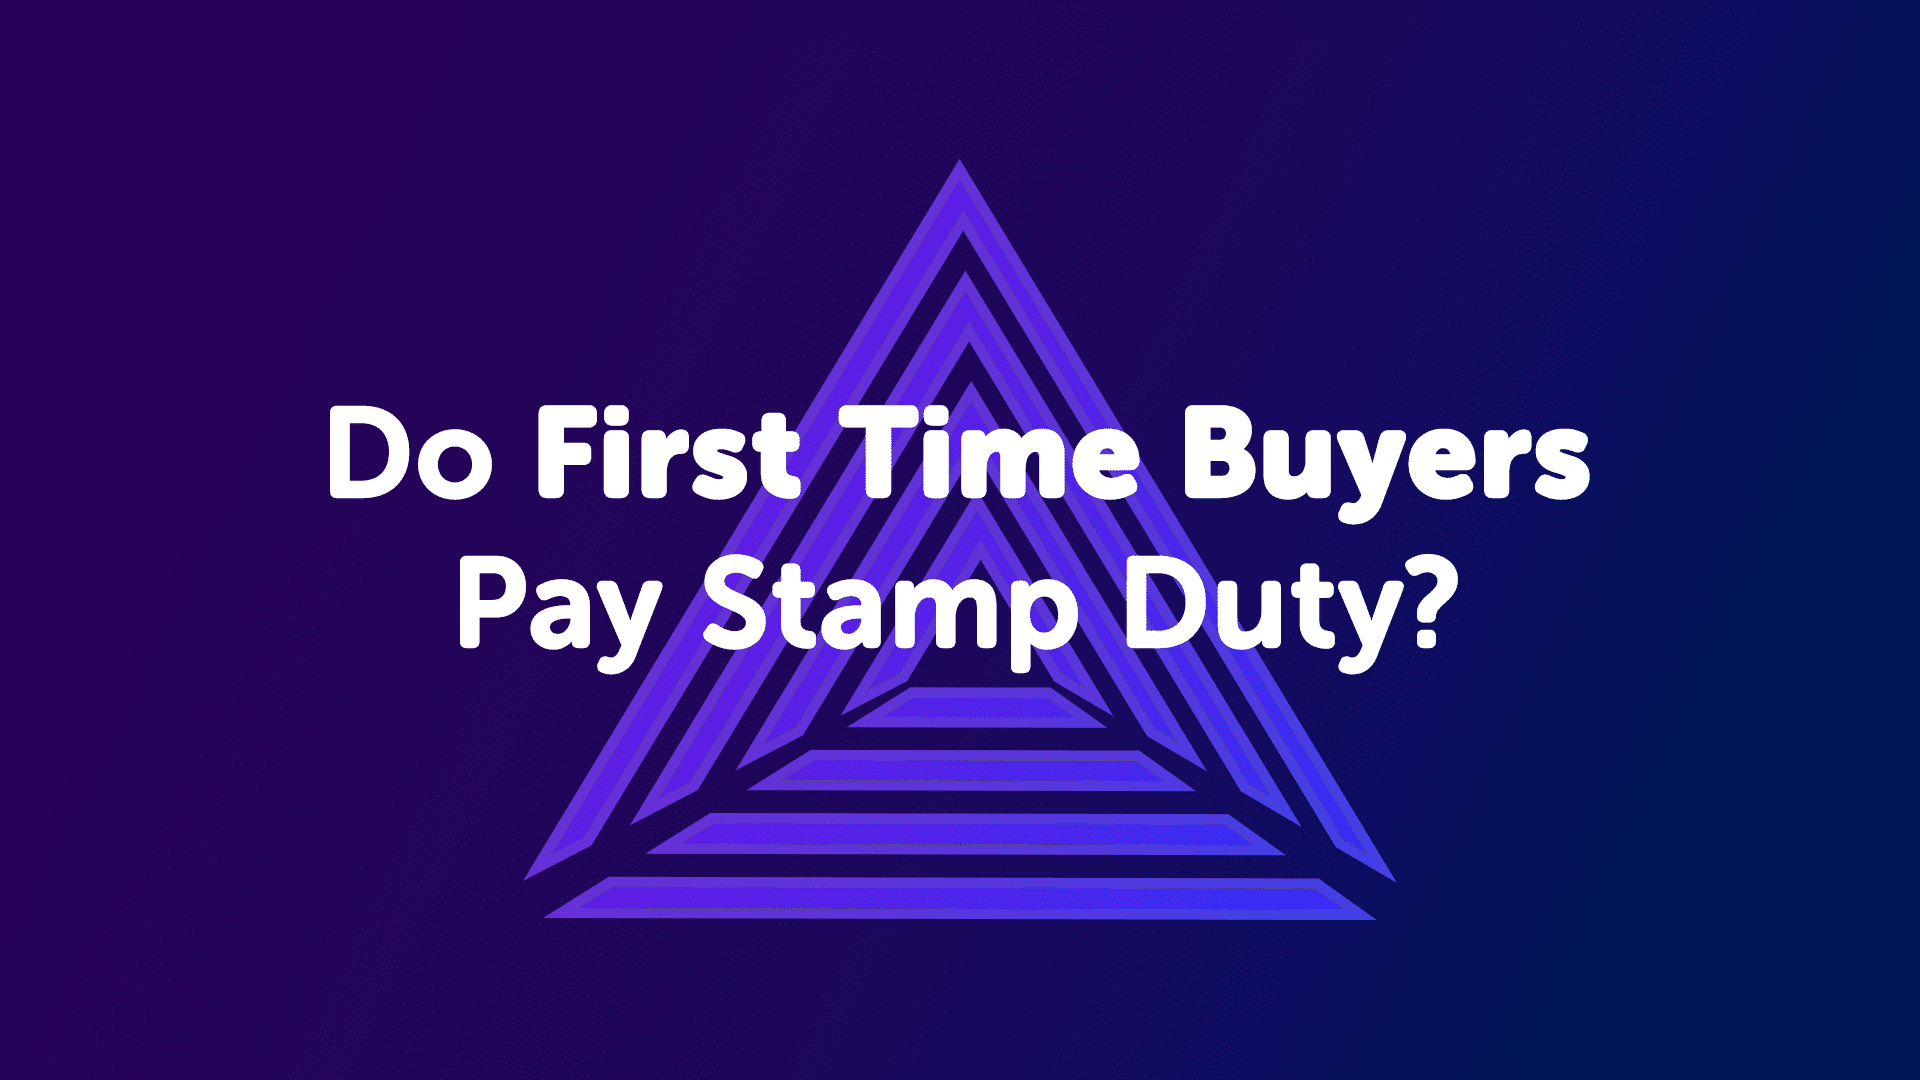 Do First Time Buyers Pay Stamp Duty in Manchester